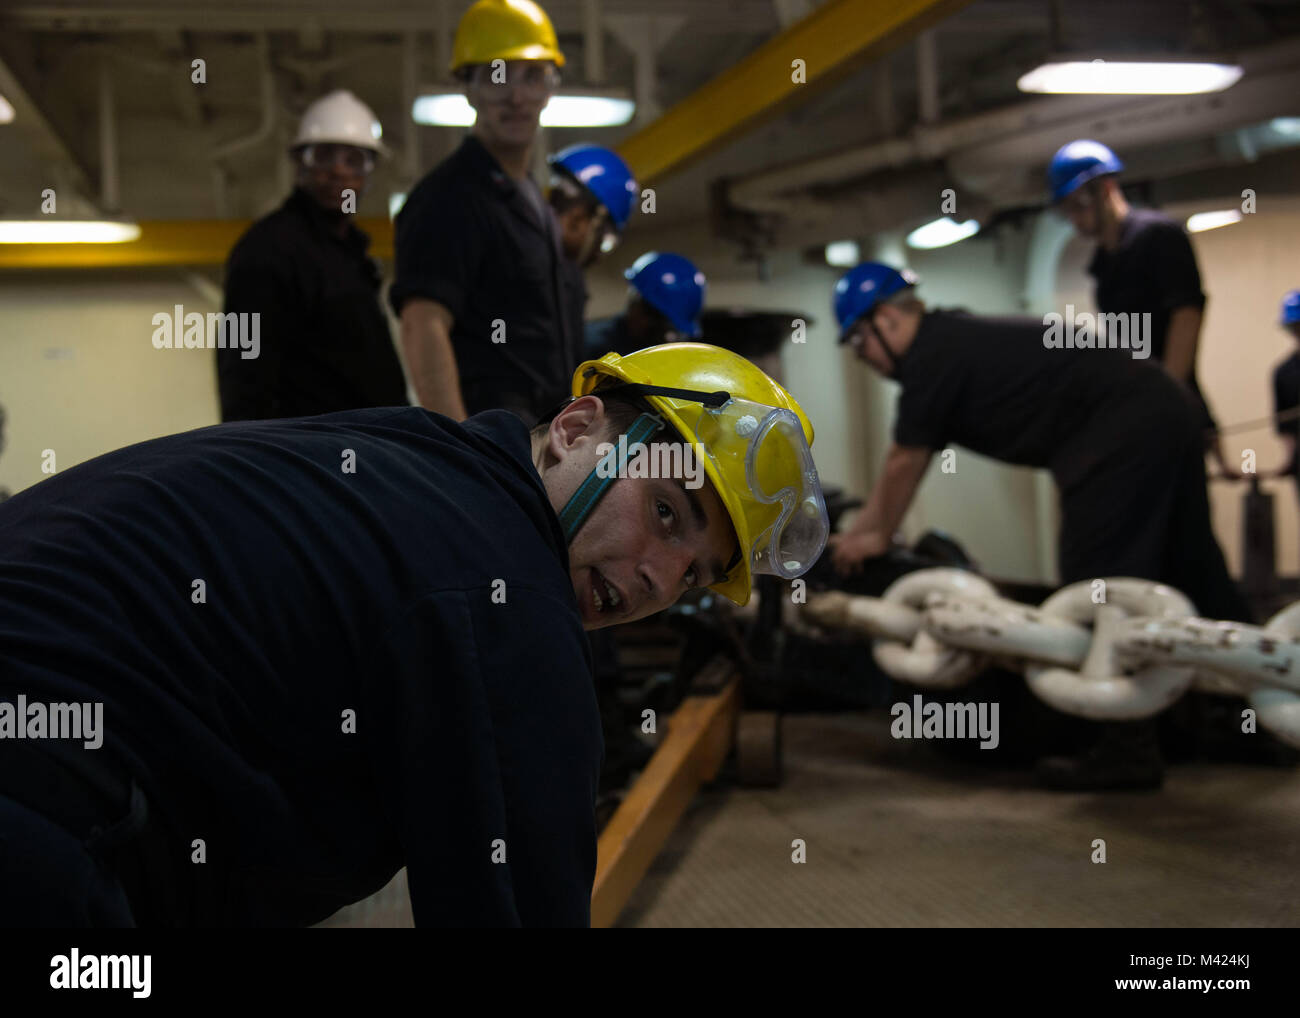 180210-N-AH771-0055    ATLANTIC OCEAN (Feb. 10, 2018) Boatswain's Mate 2nd Class Michael Cundiff from Brandenburg, Kentucky, steadies a cable jack during an anchoring evolution in the fo’c’sle of the amphibious assault ship USS Iwo Jima (LHD 7).  The Iwo Jima Amphibious Ready Group (ARG) is deployed in support of maritime security operations and theater security cooperation efforts in Europe and the Middle East.  The Iwo Jima ARG embarks the 26th Marine Expeditionary Unit and includes Iwo Jima, the amphibious transport dock ship USS New York (LPD 21), the dock landing ship USS Oak Hill (LSD 51 Stock Photo